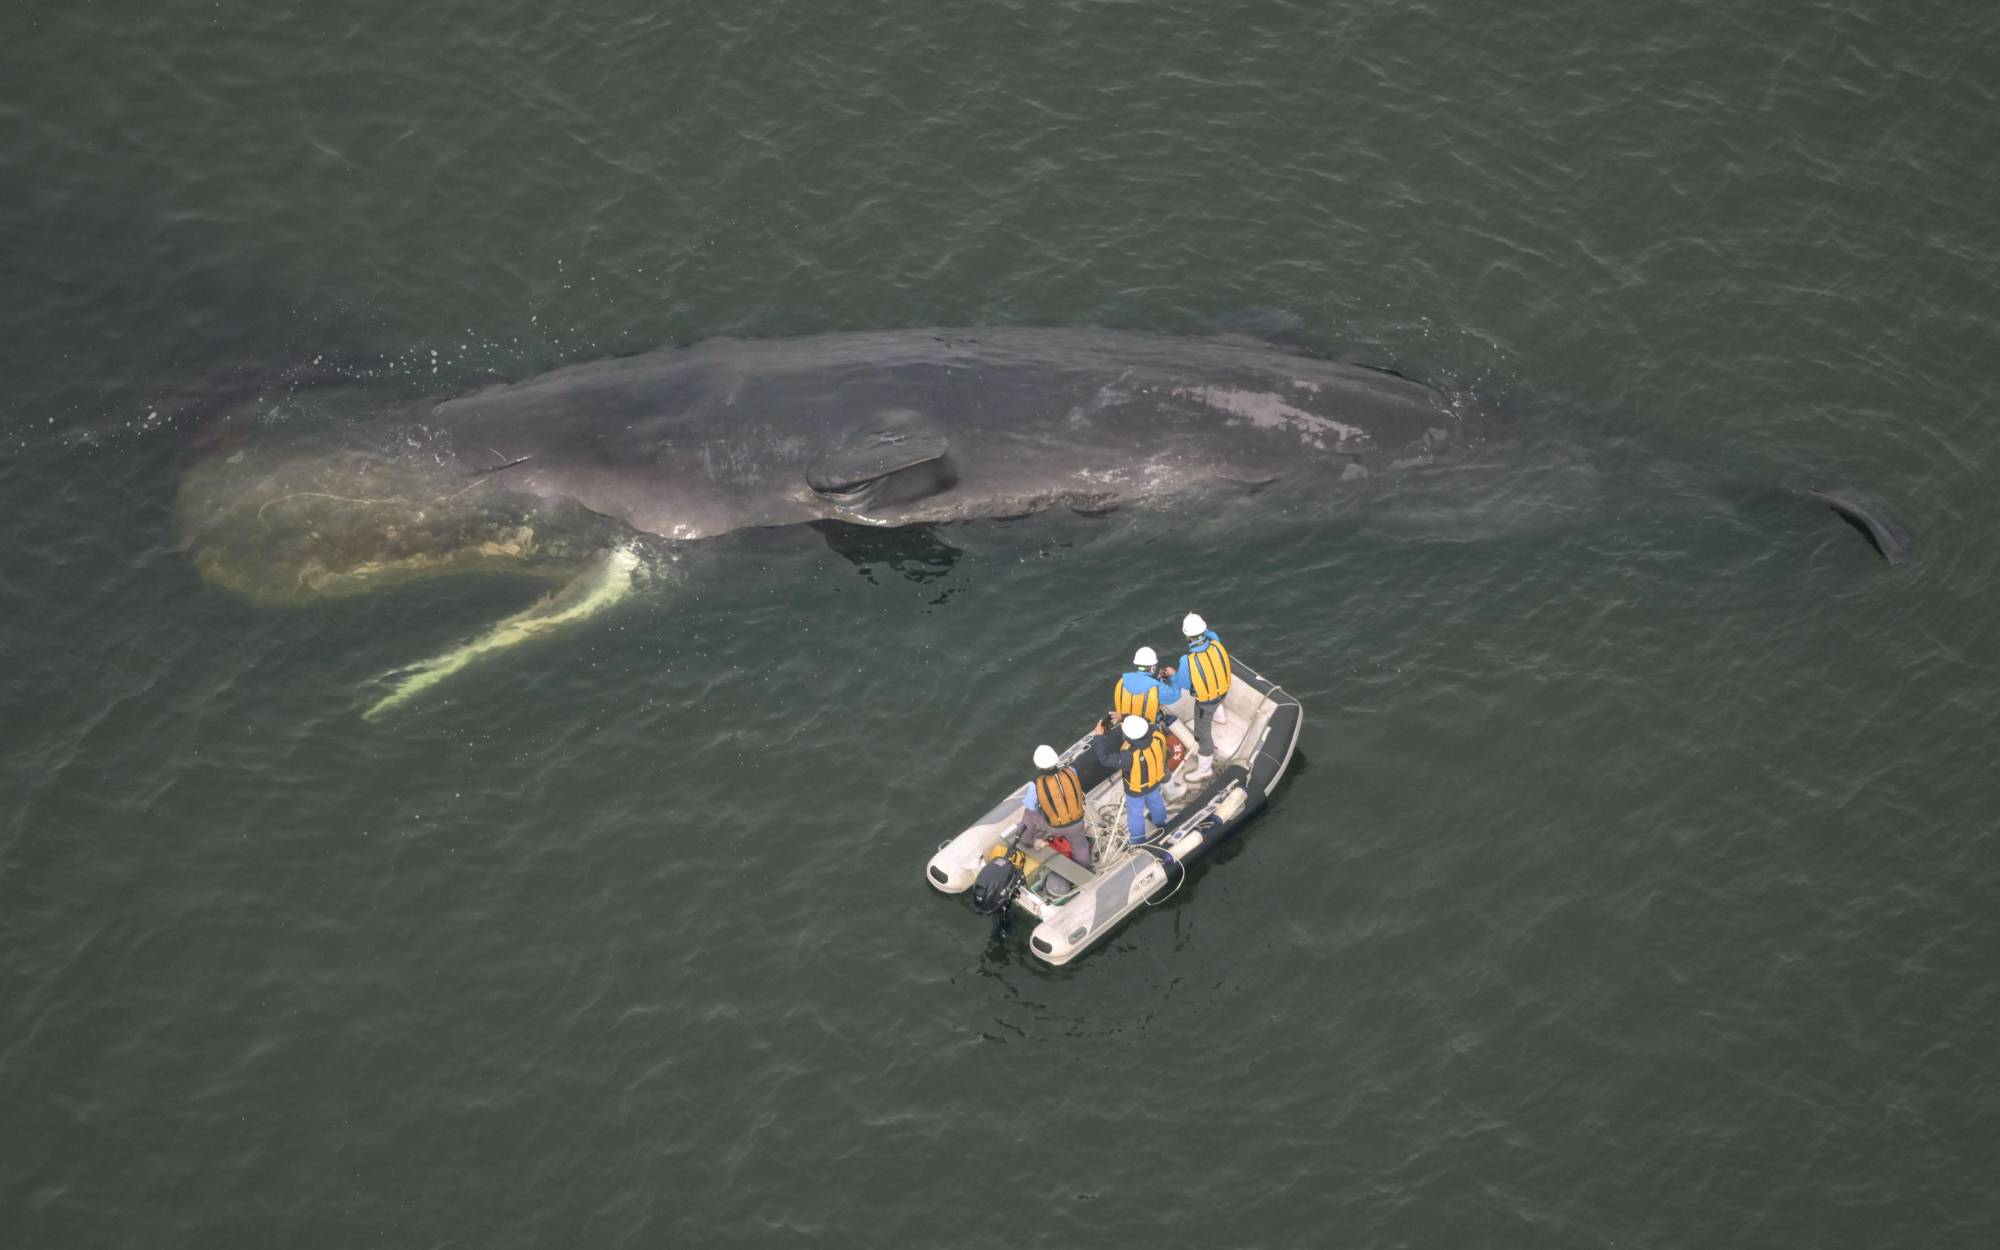 A whale spotted near the mouth of the Yodo River in Osaka has been confirmed dead and will be sunk off Osaka Bay. | KYODO